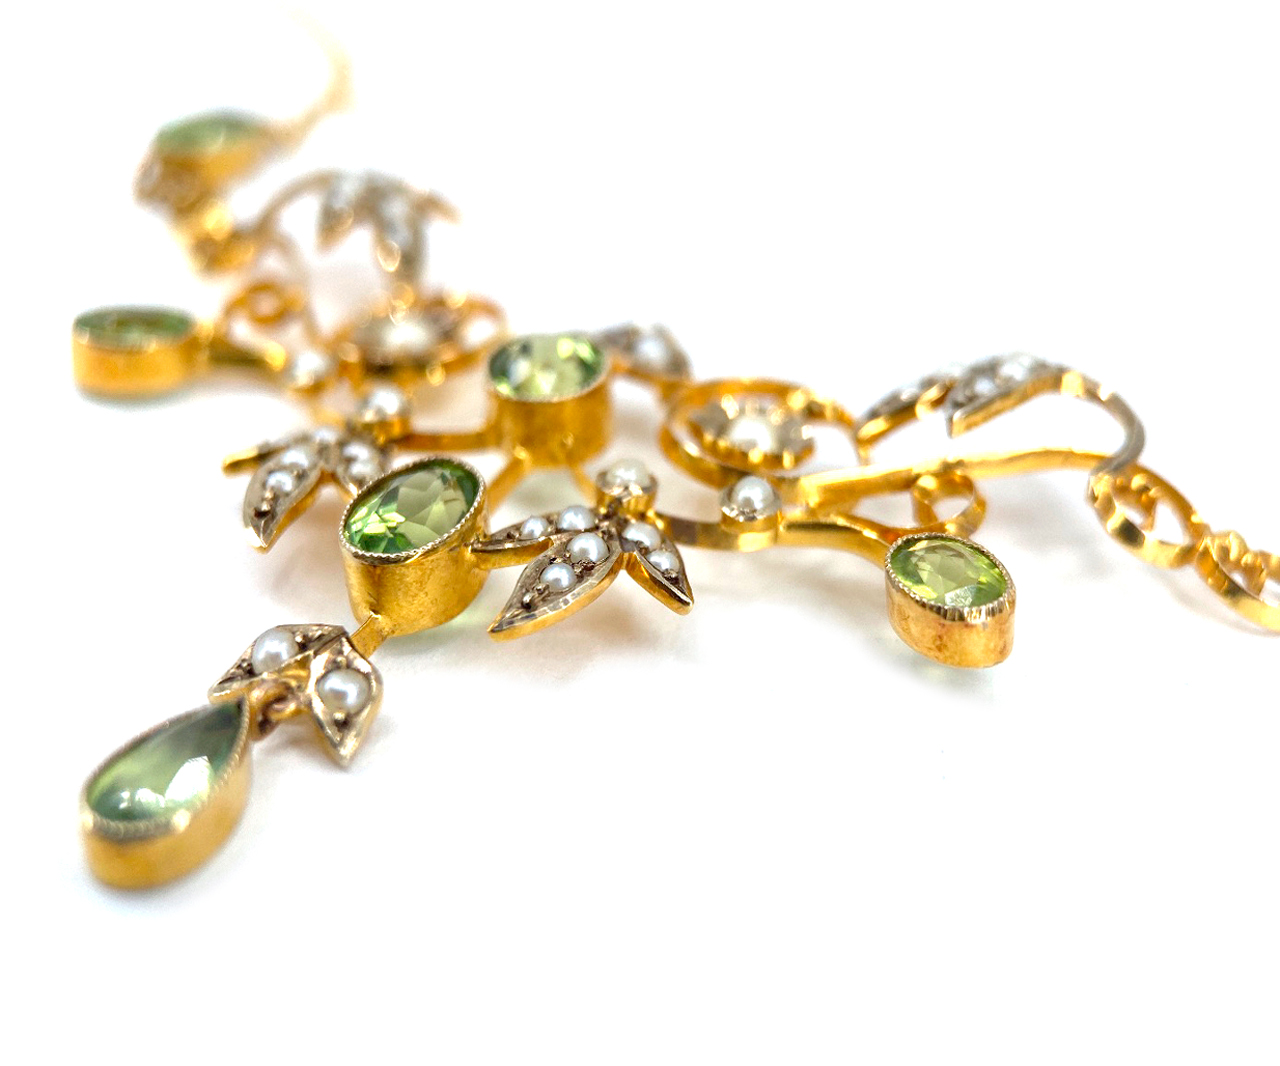 Antique Peridot & Seed Pearl Necklace Edwardian 15ct Gold Garland Necklace  | eBay